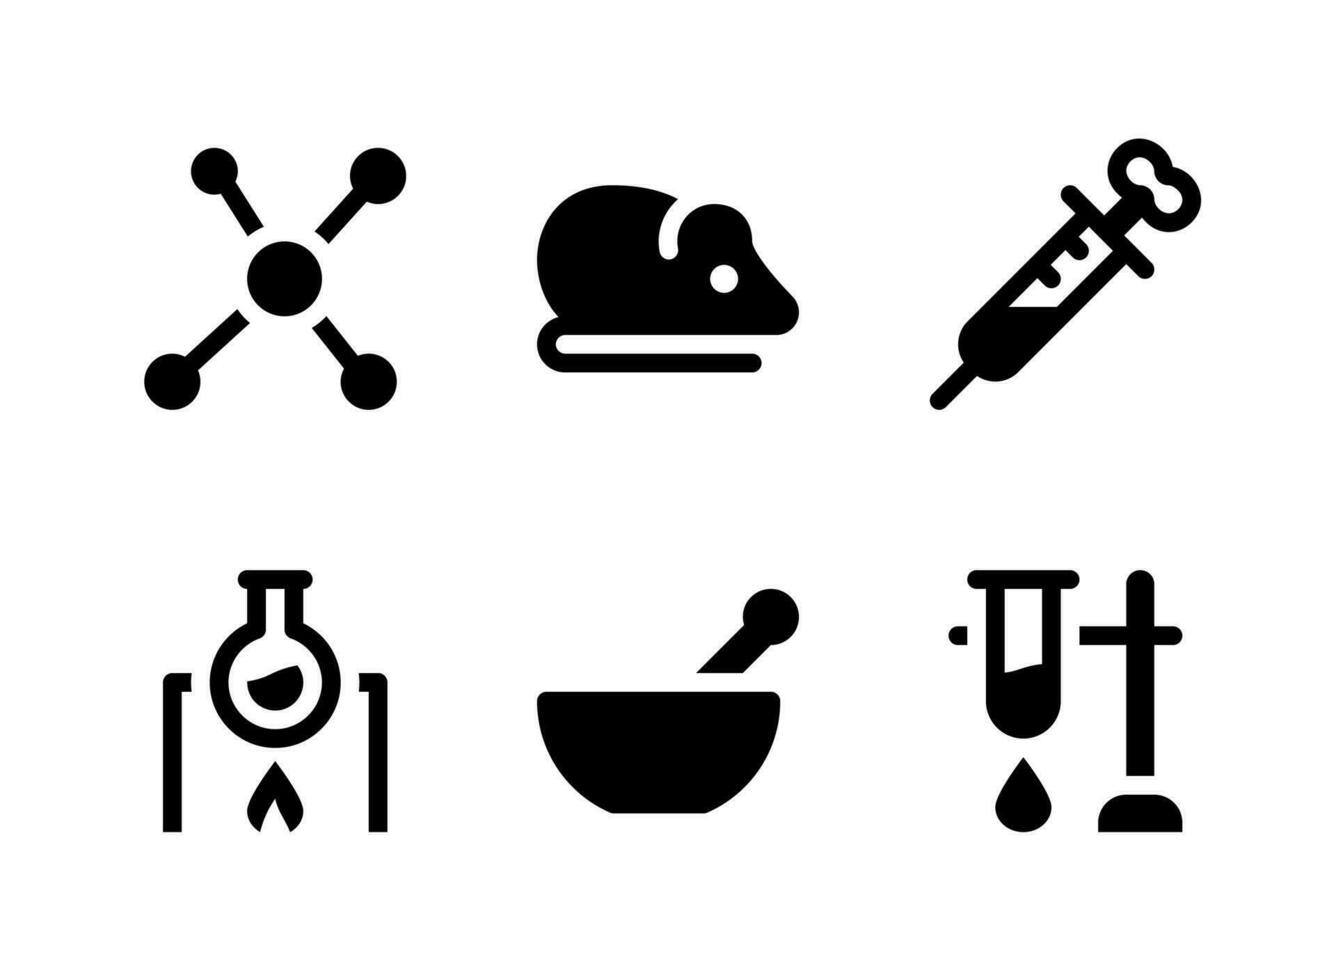 Simple Set of Laboratory Related Vector Solid Icons. Contains Icons as Molecule, Mouse, Heating Chemistry, Mortar Pestle and more.